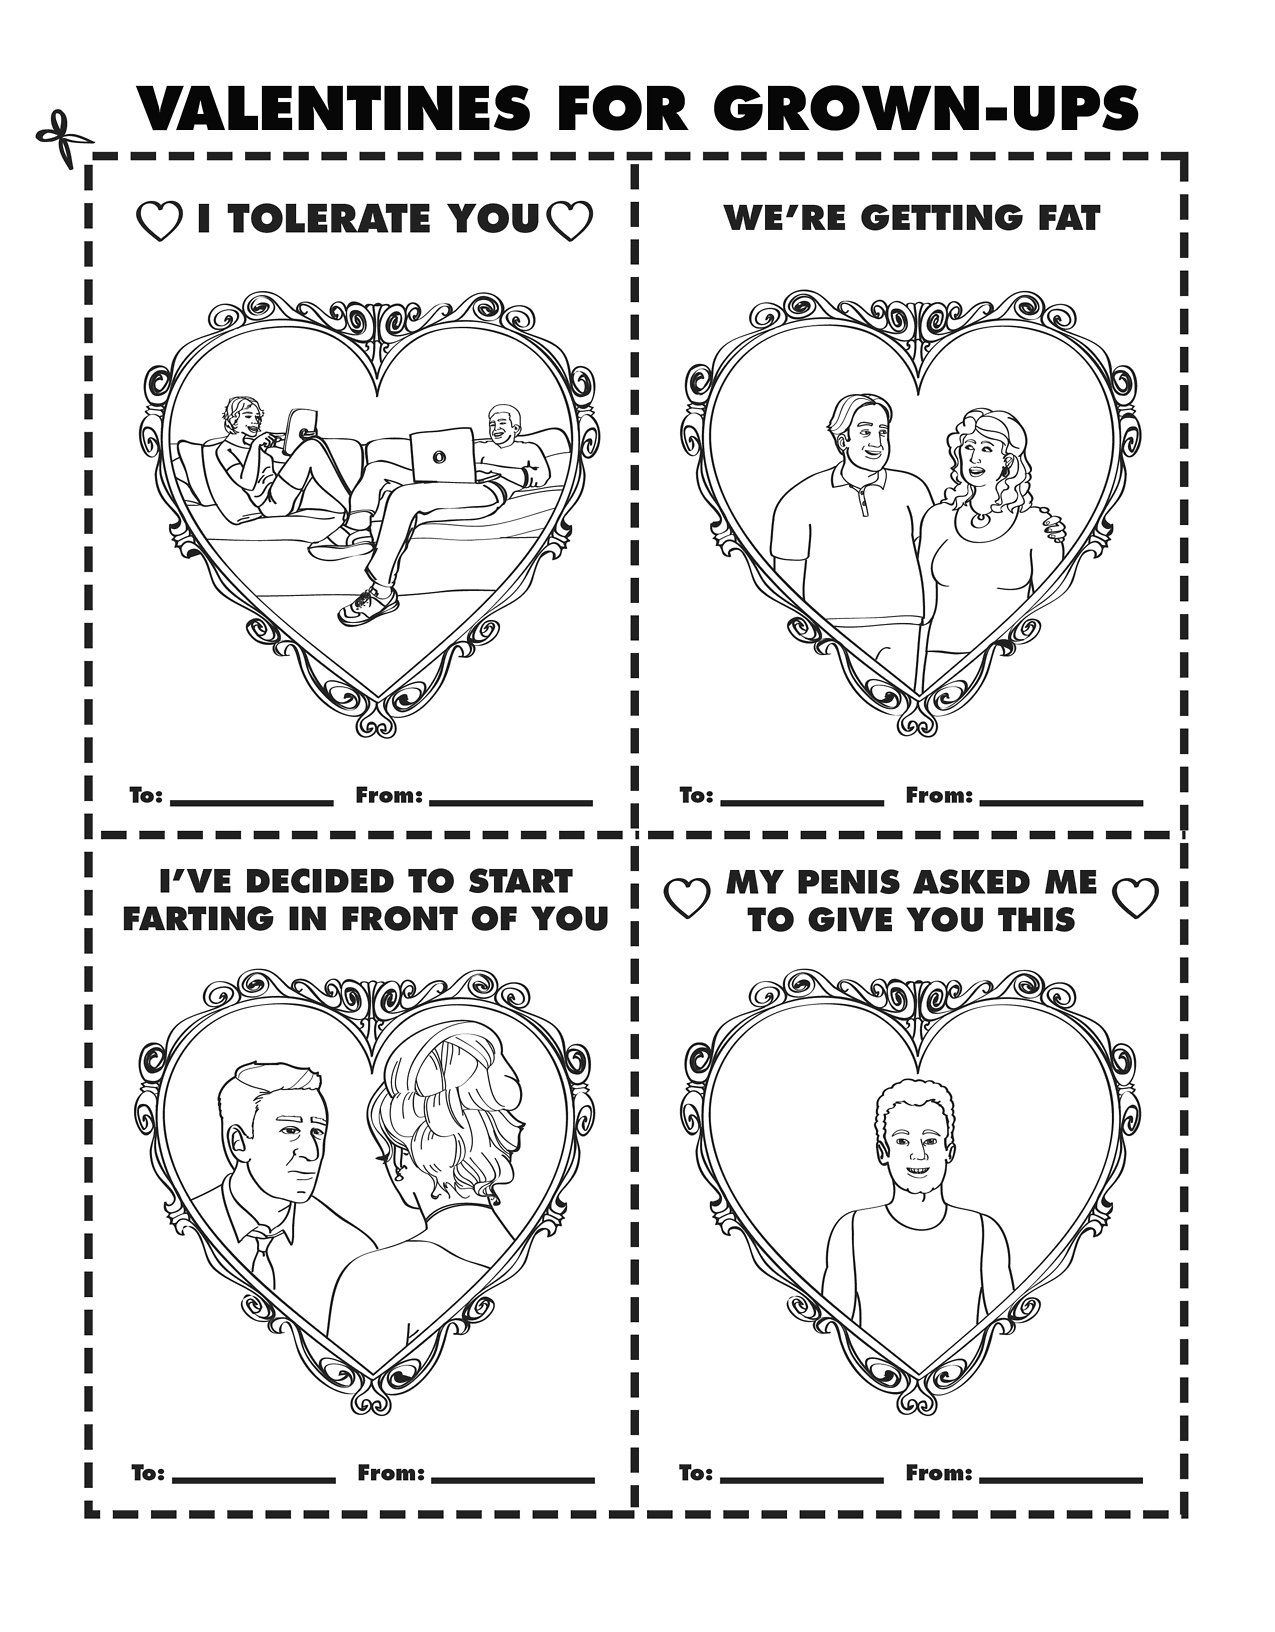 Coloring book - Valentines For GrownUps I Tolerate You We'Re Getting Fat 16 C22 I'Ve Decided To Start Farting In Front Of You My Penis Asked Me To Give You This Vi